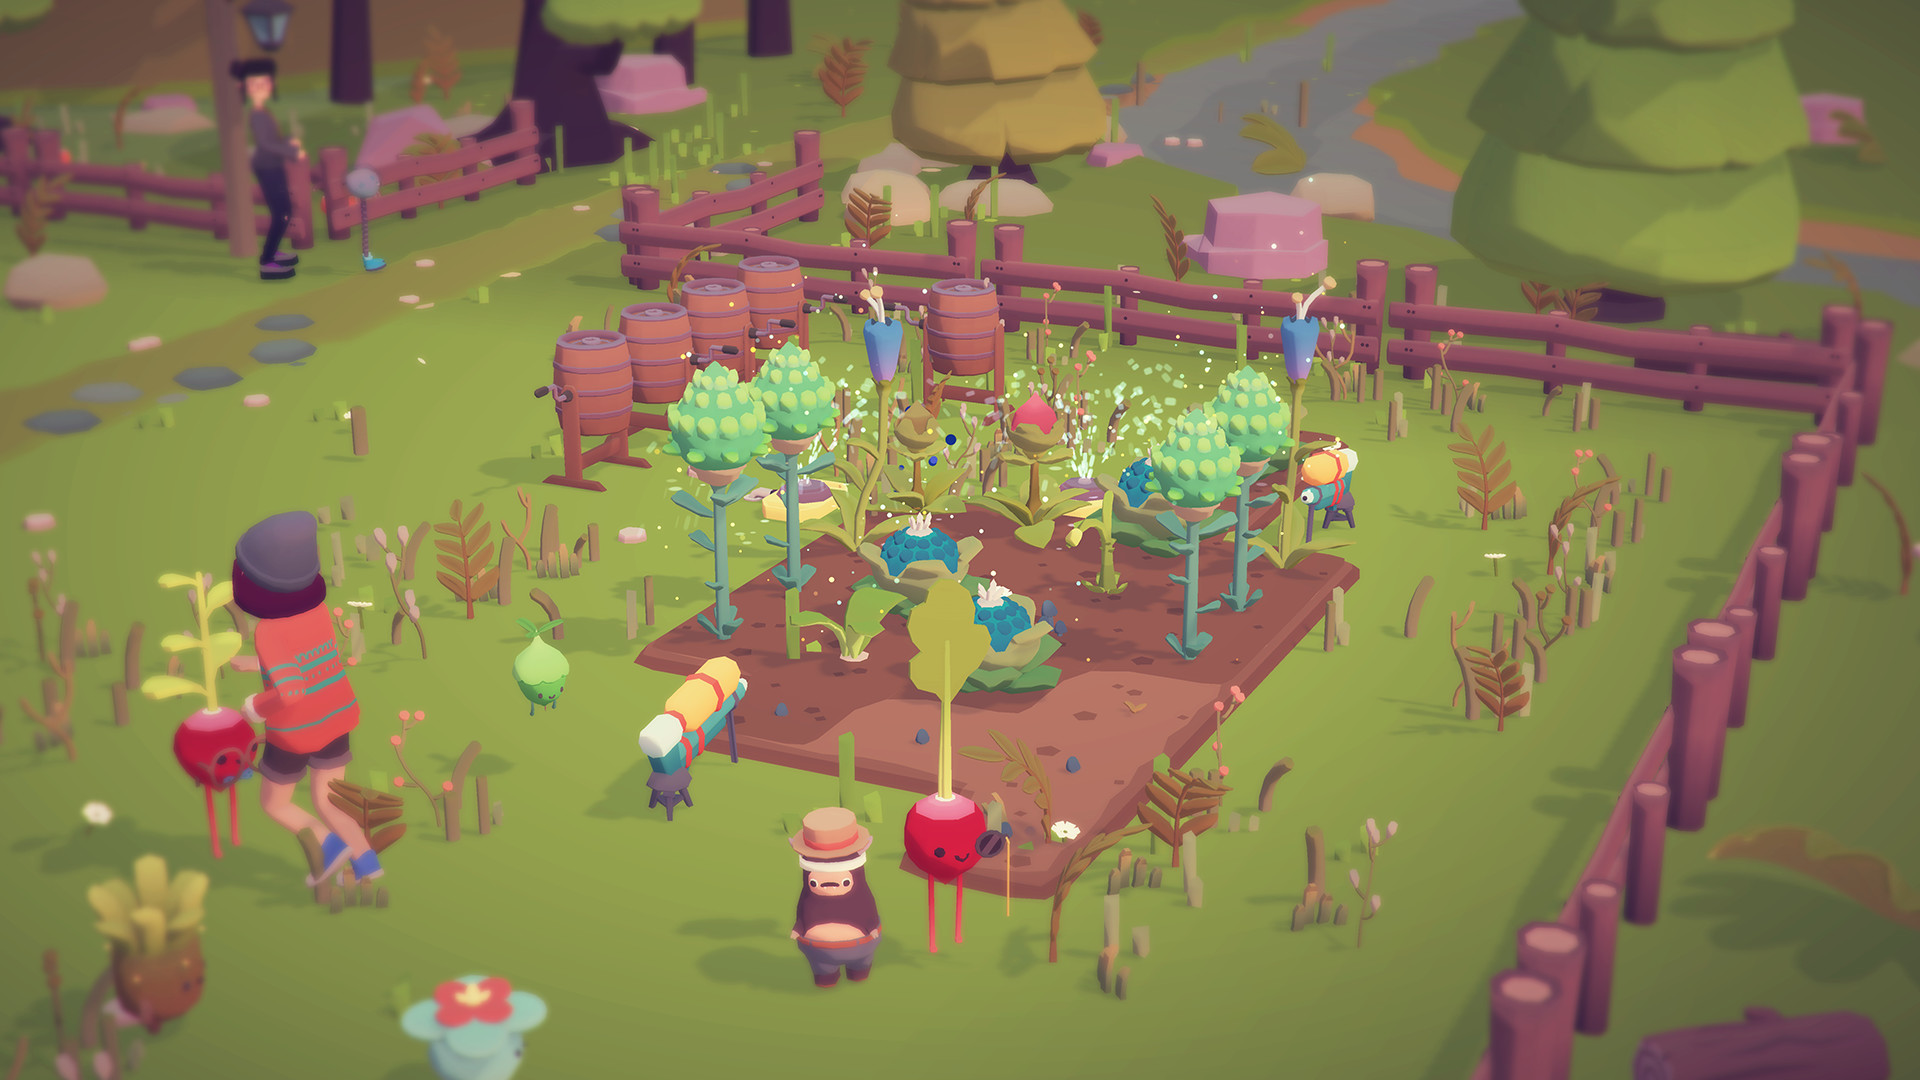 download ooblets game pass for free